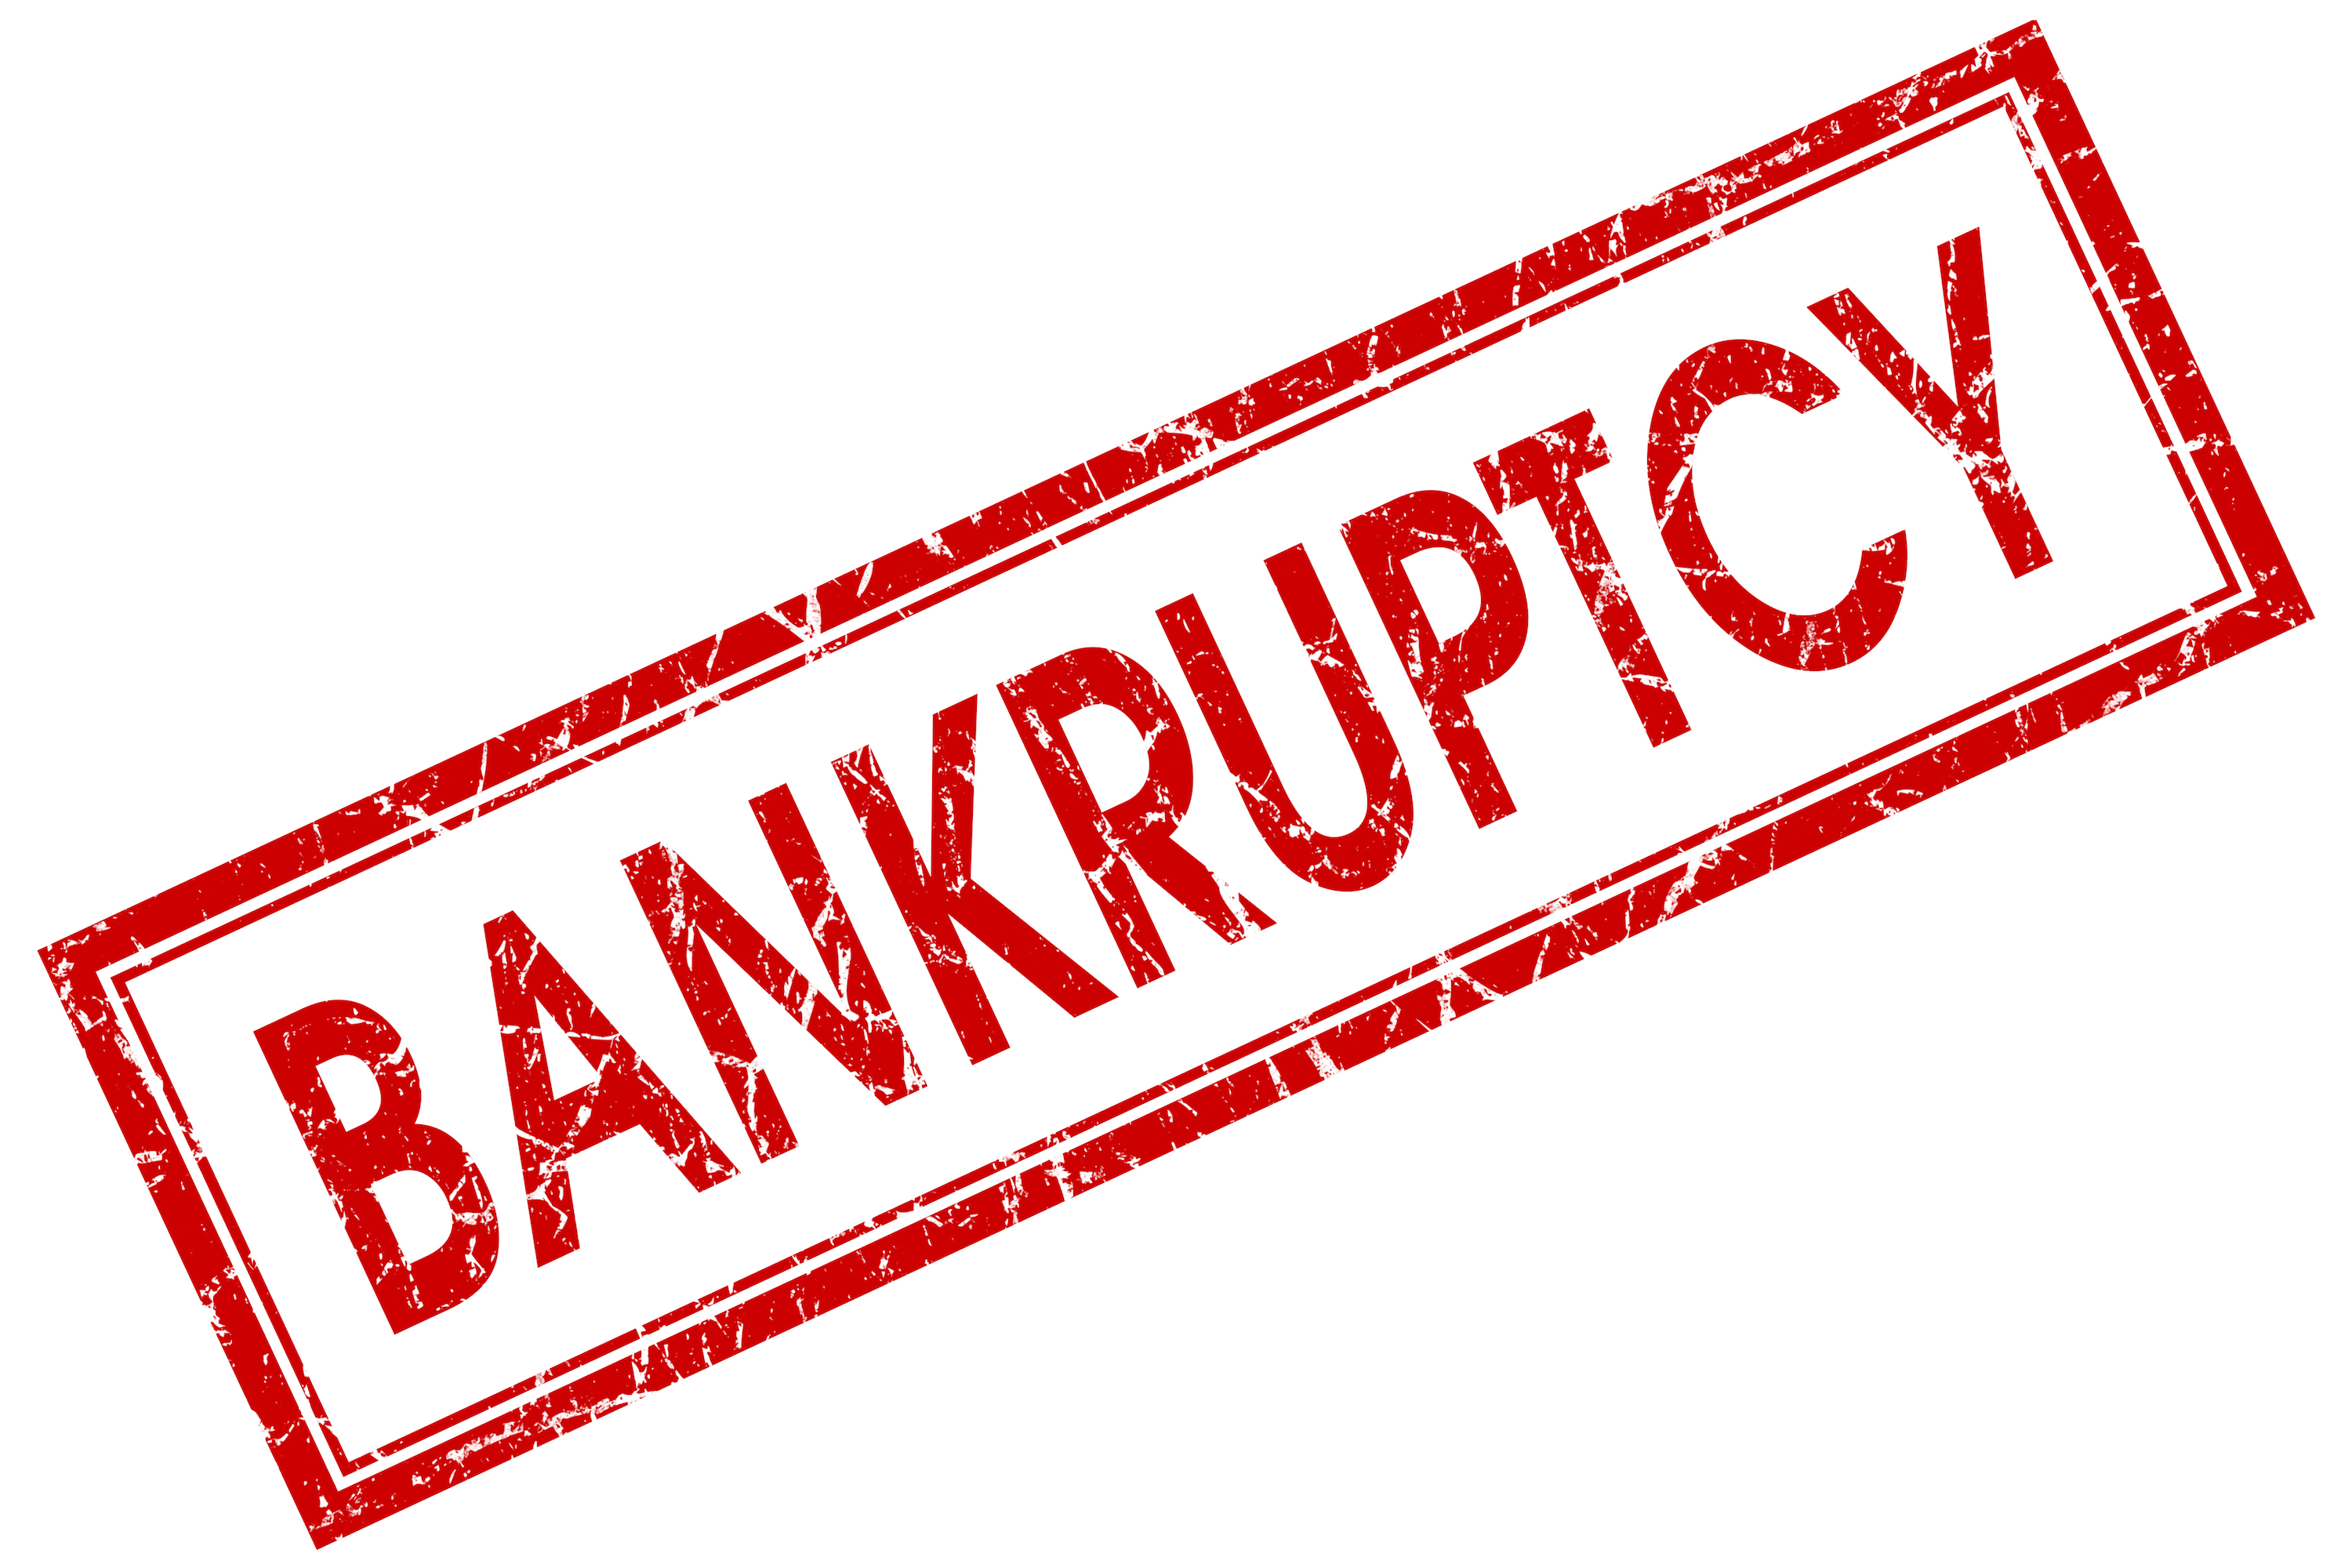 Bankruptcy Meaning and Definition